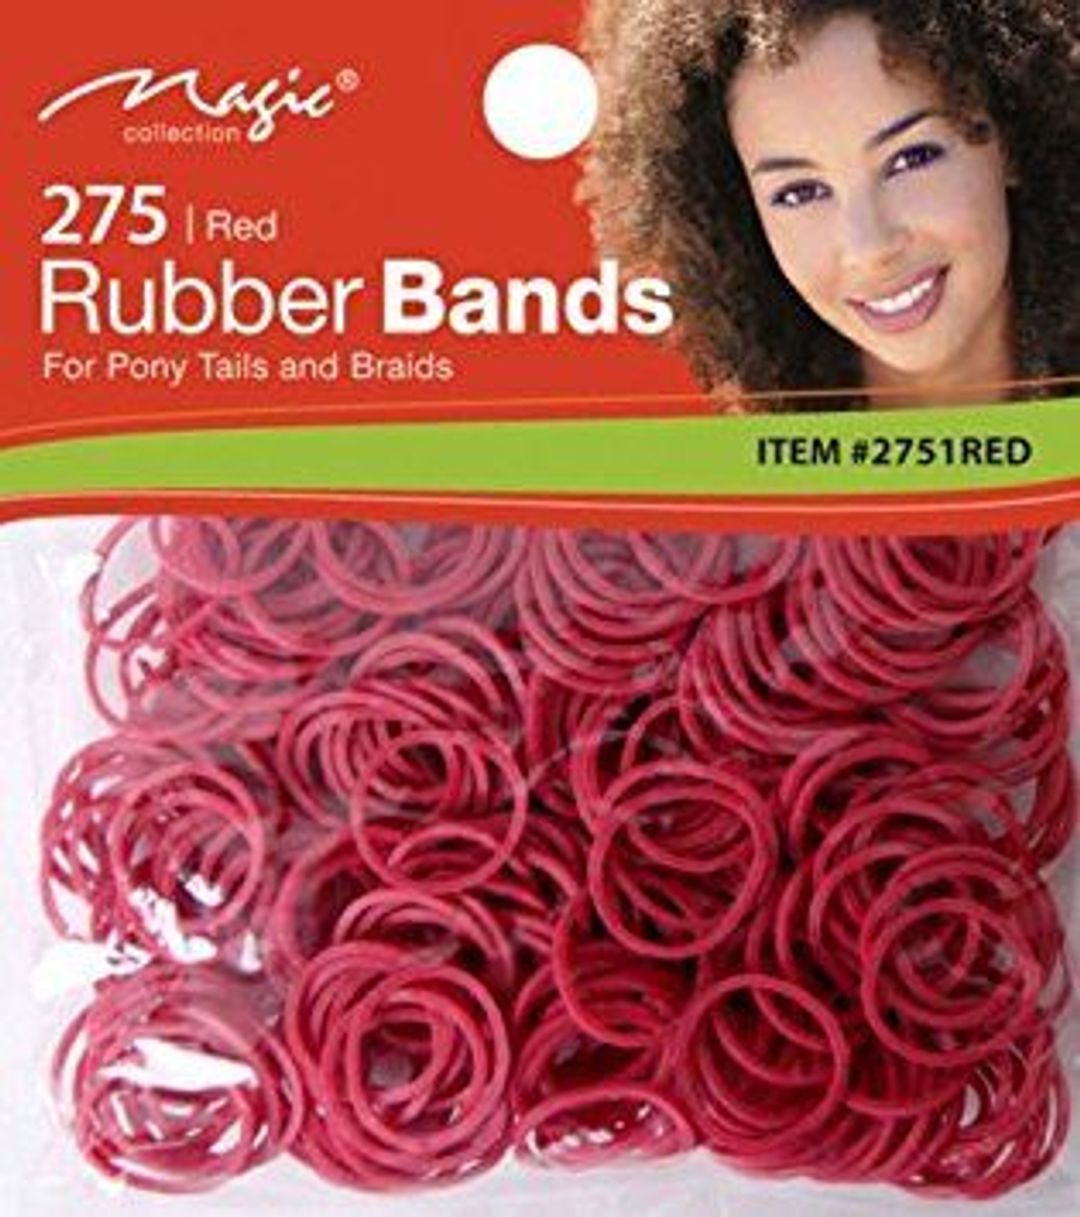 Magic Collection 275 Rubber Bands Red - 2751